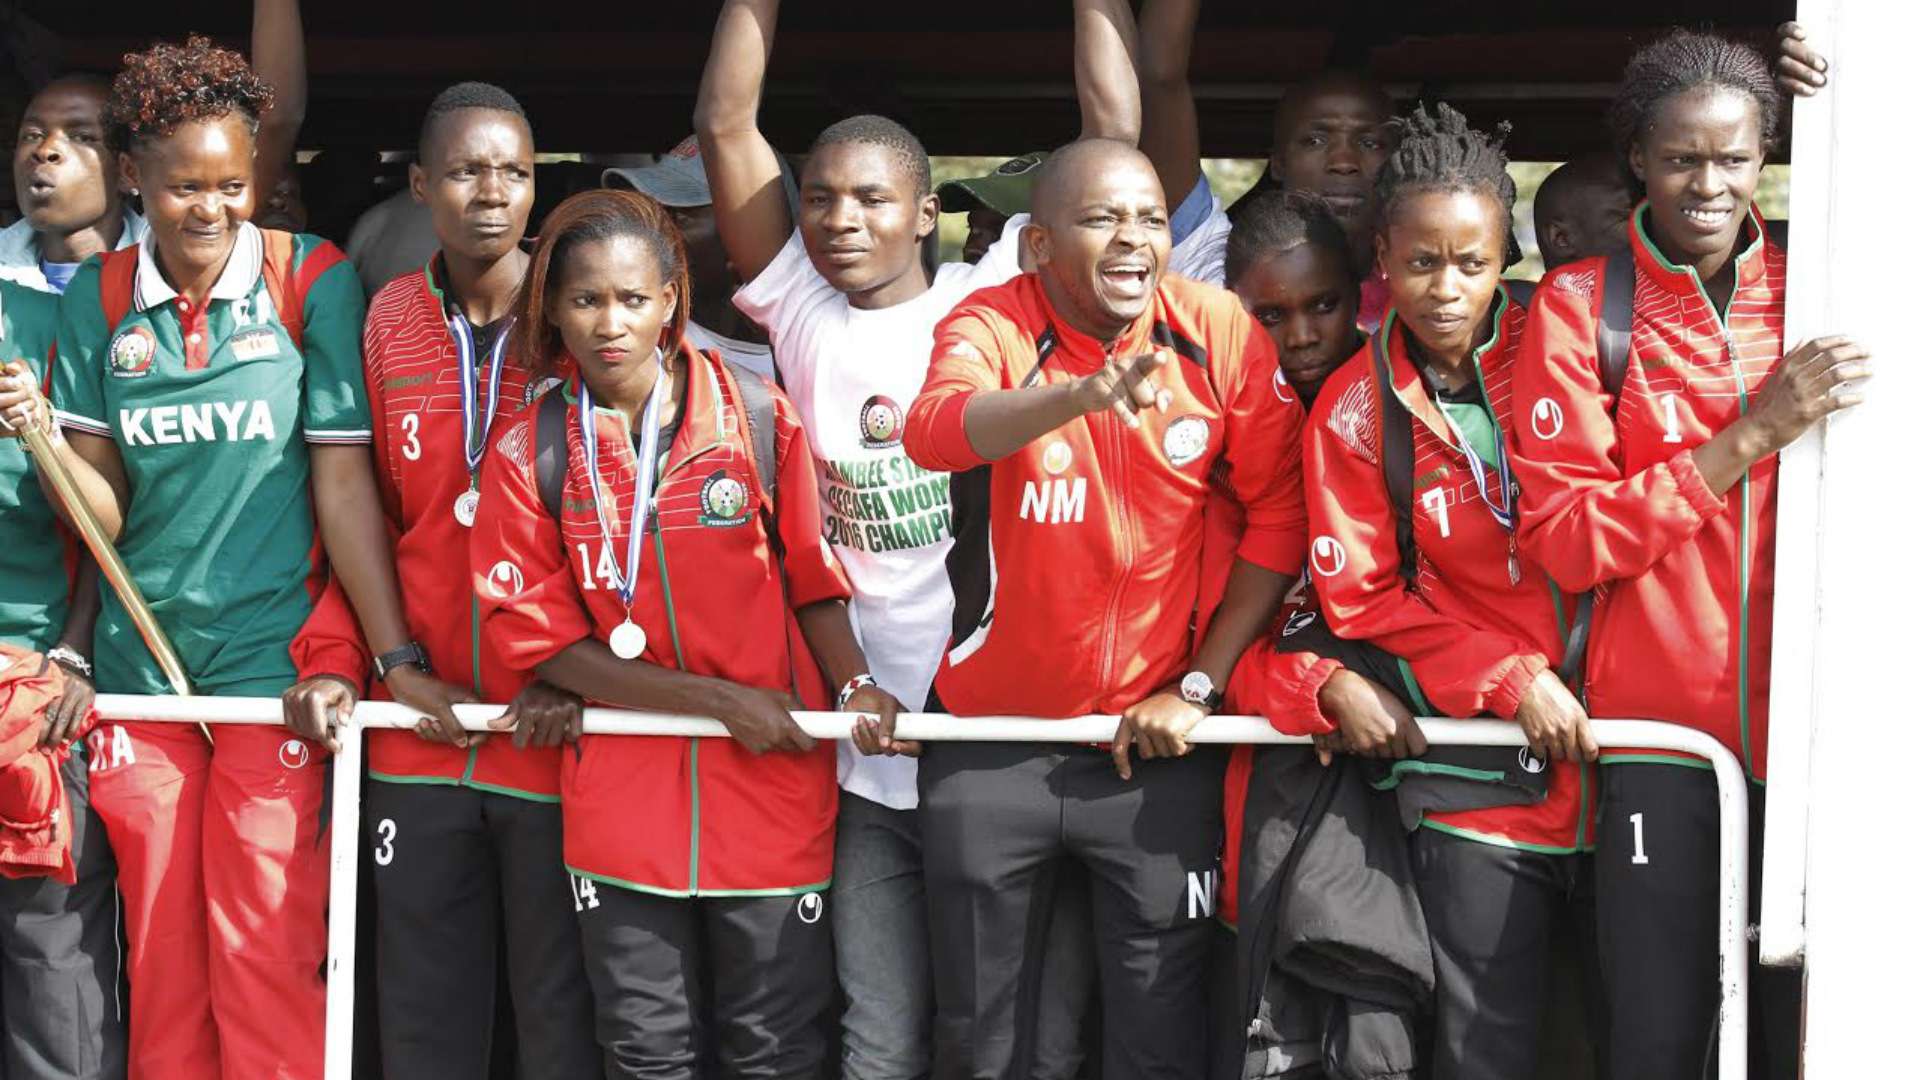 Harambee Starlets were received at JKIA by FKF President Nick Mwendwa